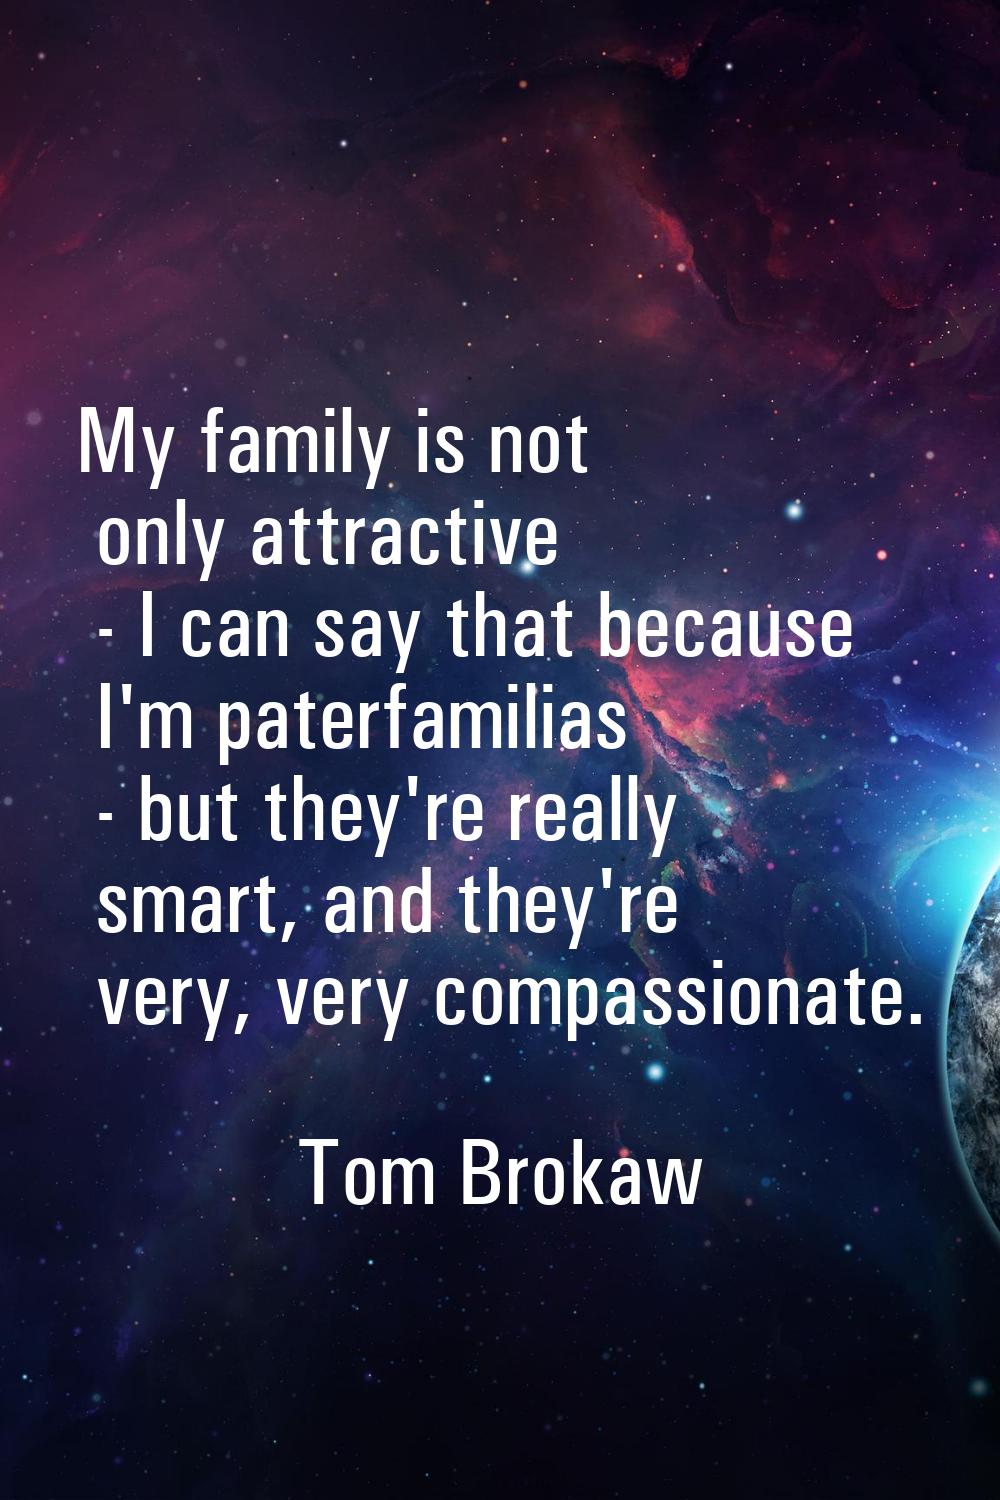 My family is not only attractive - I can say that because I'm paterfamilias - but they're really sm